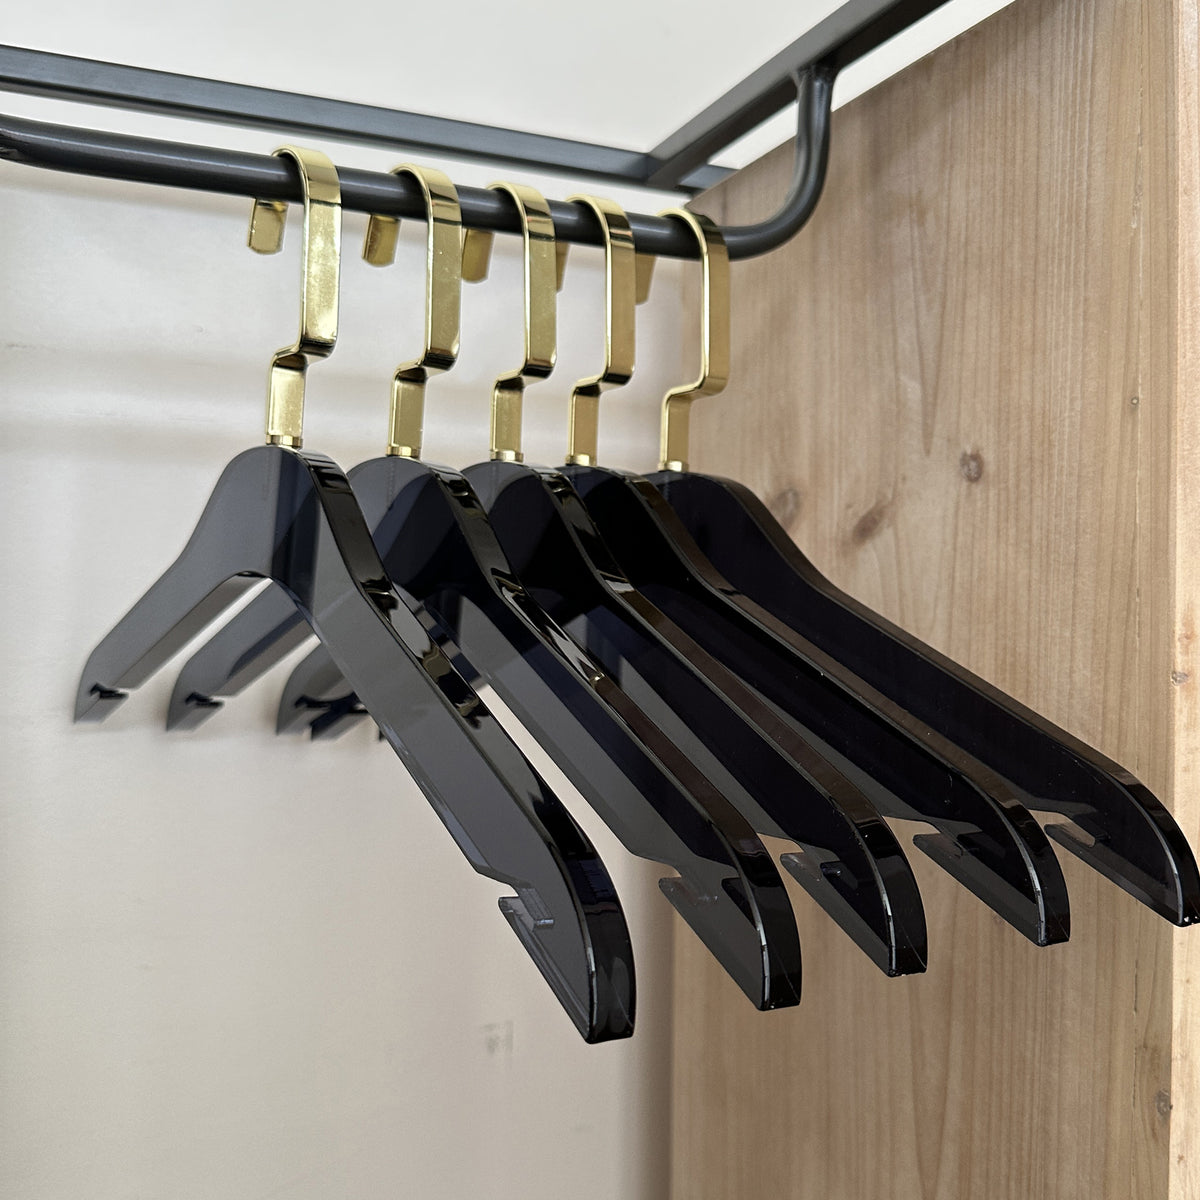 Designstyles Smoke Acrylic Clothes Hangers With Pants Bar